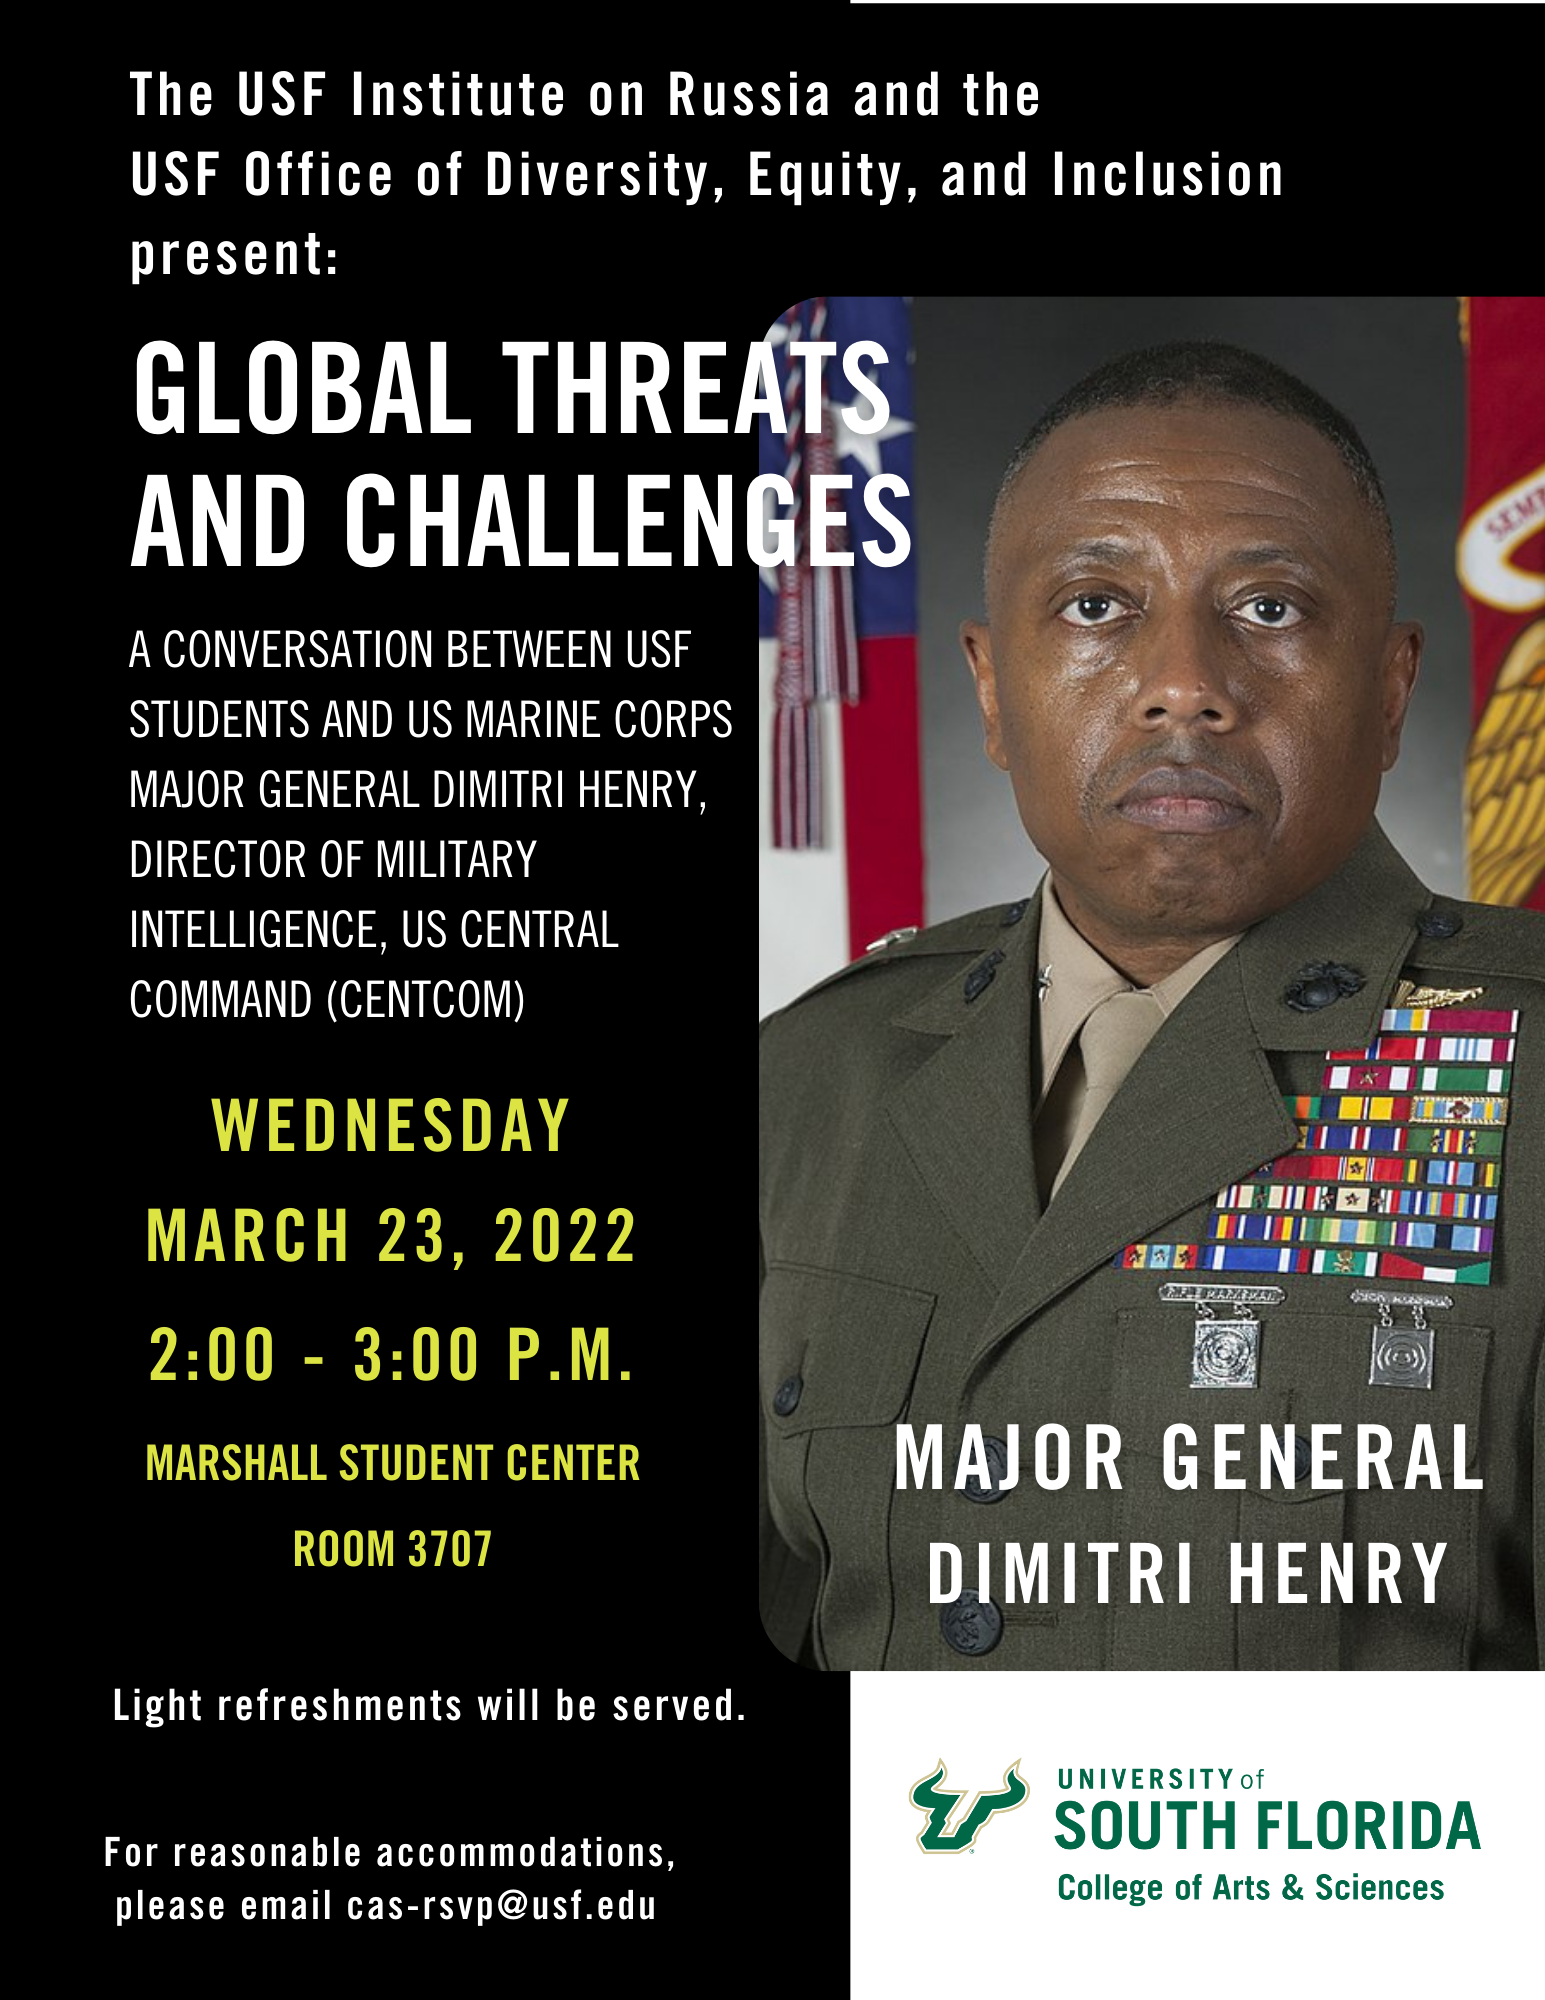 Global Threats and Challenges event flyer